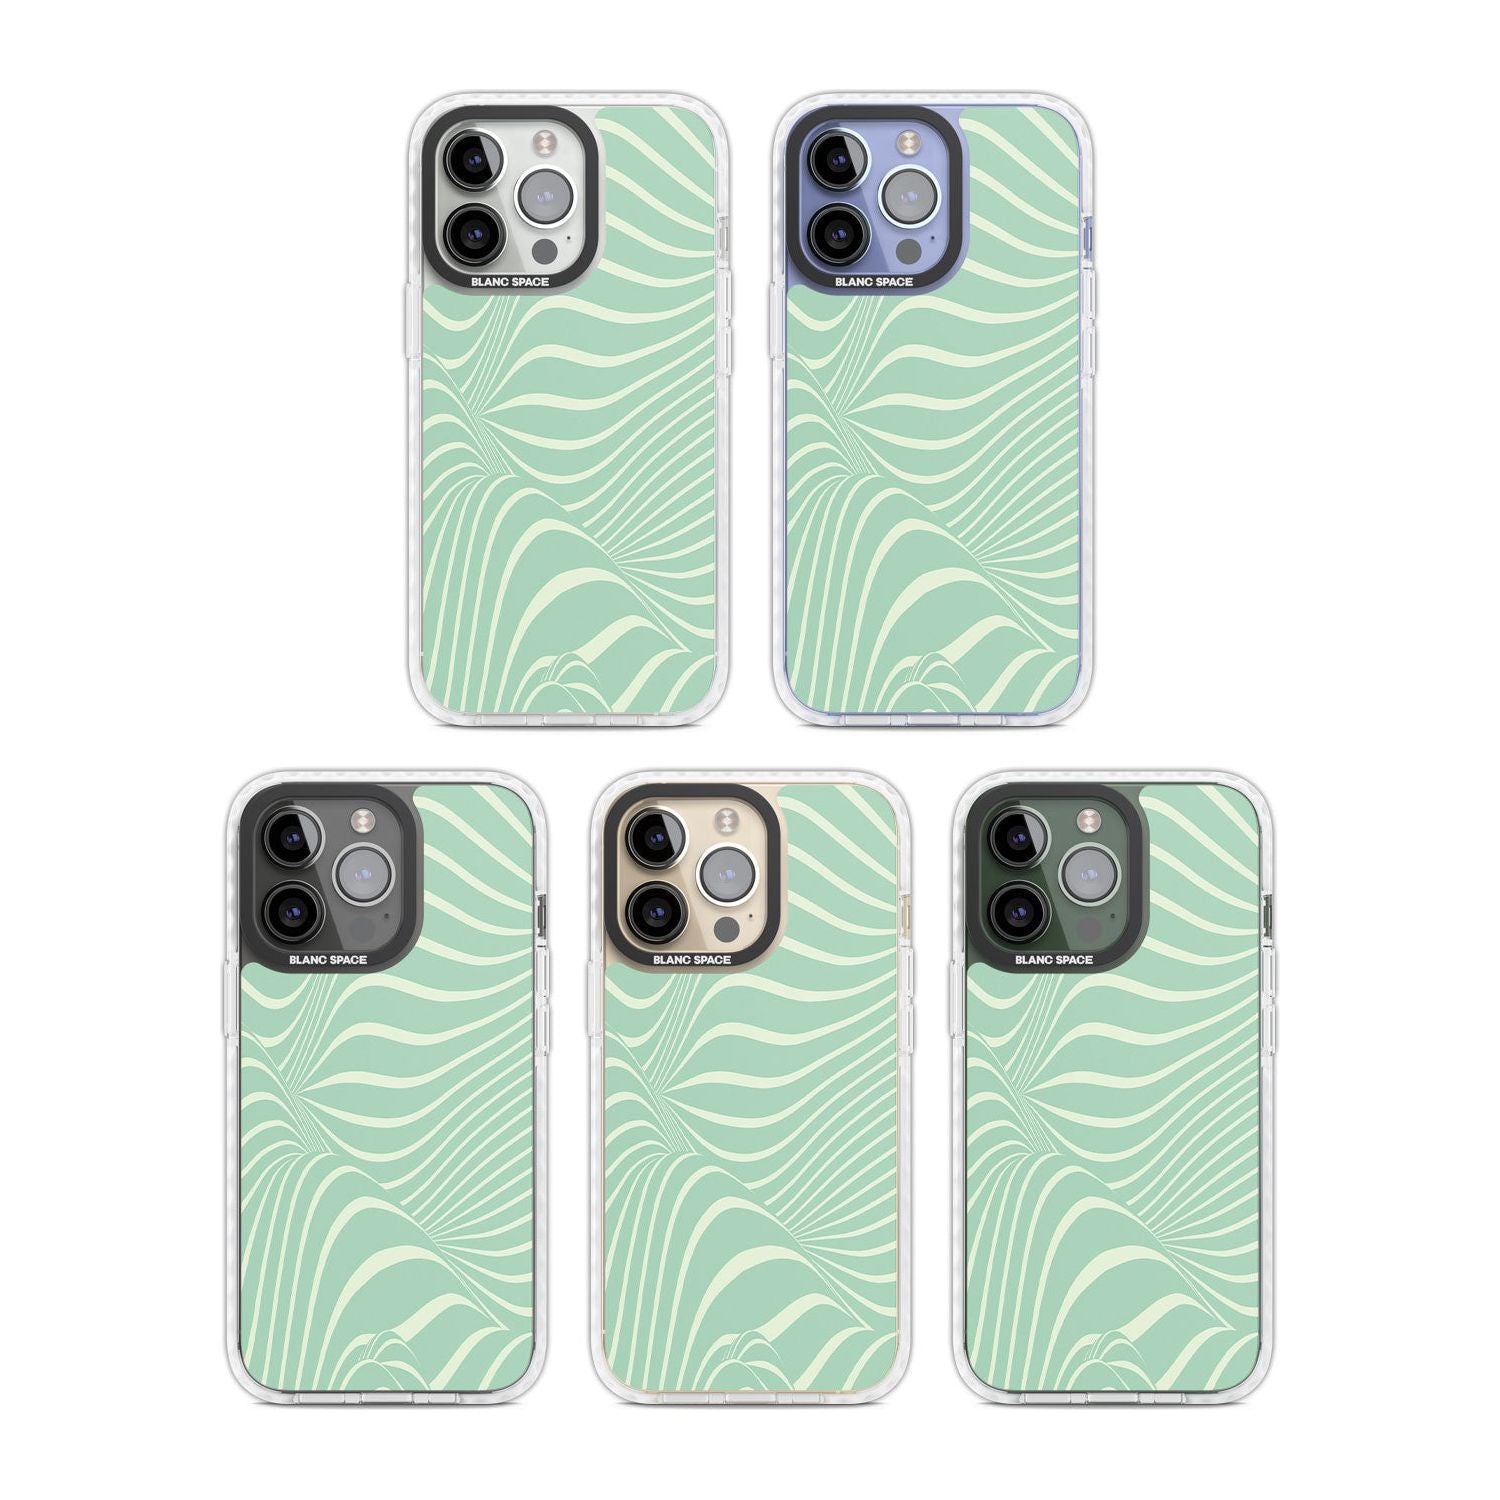 Mint Green Distorted Line Phone Case iPhone 15 Pro Max / Black Impact Case,iPhone 15 Plus / Black Impact Case,iPhone 15 Pro / Black Impact Case,iPhone 15 / Black Impact Case,iPhone 15 Pro Max / Impact Case,iPhone 15 Plus / Impact Case,iPhone 15 Pro / Impact Case,iPhone 15 / Impact Case,iPhone 15 Pro Max / Magsafe Black Impact Case,iPhone 15 Plus / Magsafe Black Impact Case,iPhone 15 Pro / Magsafe Black Impact Case,iPhone 15 / Magsafe Black Impact Case,iPhone 14 Pro Max / Black Impact Case,iPhone 14 Plus / B